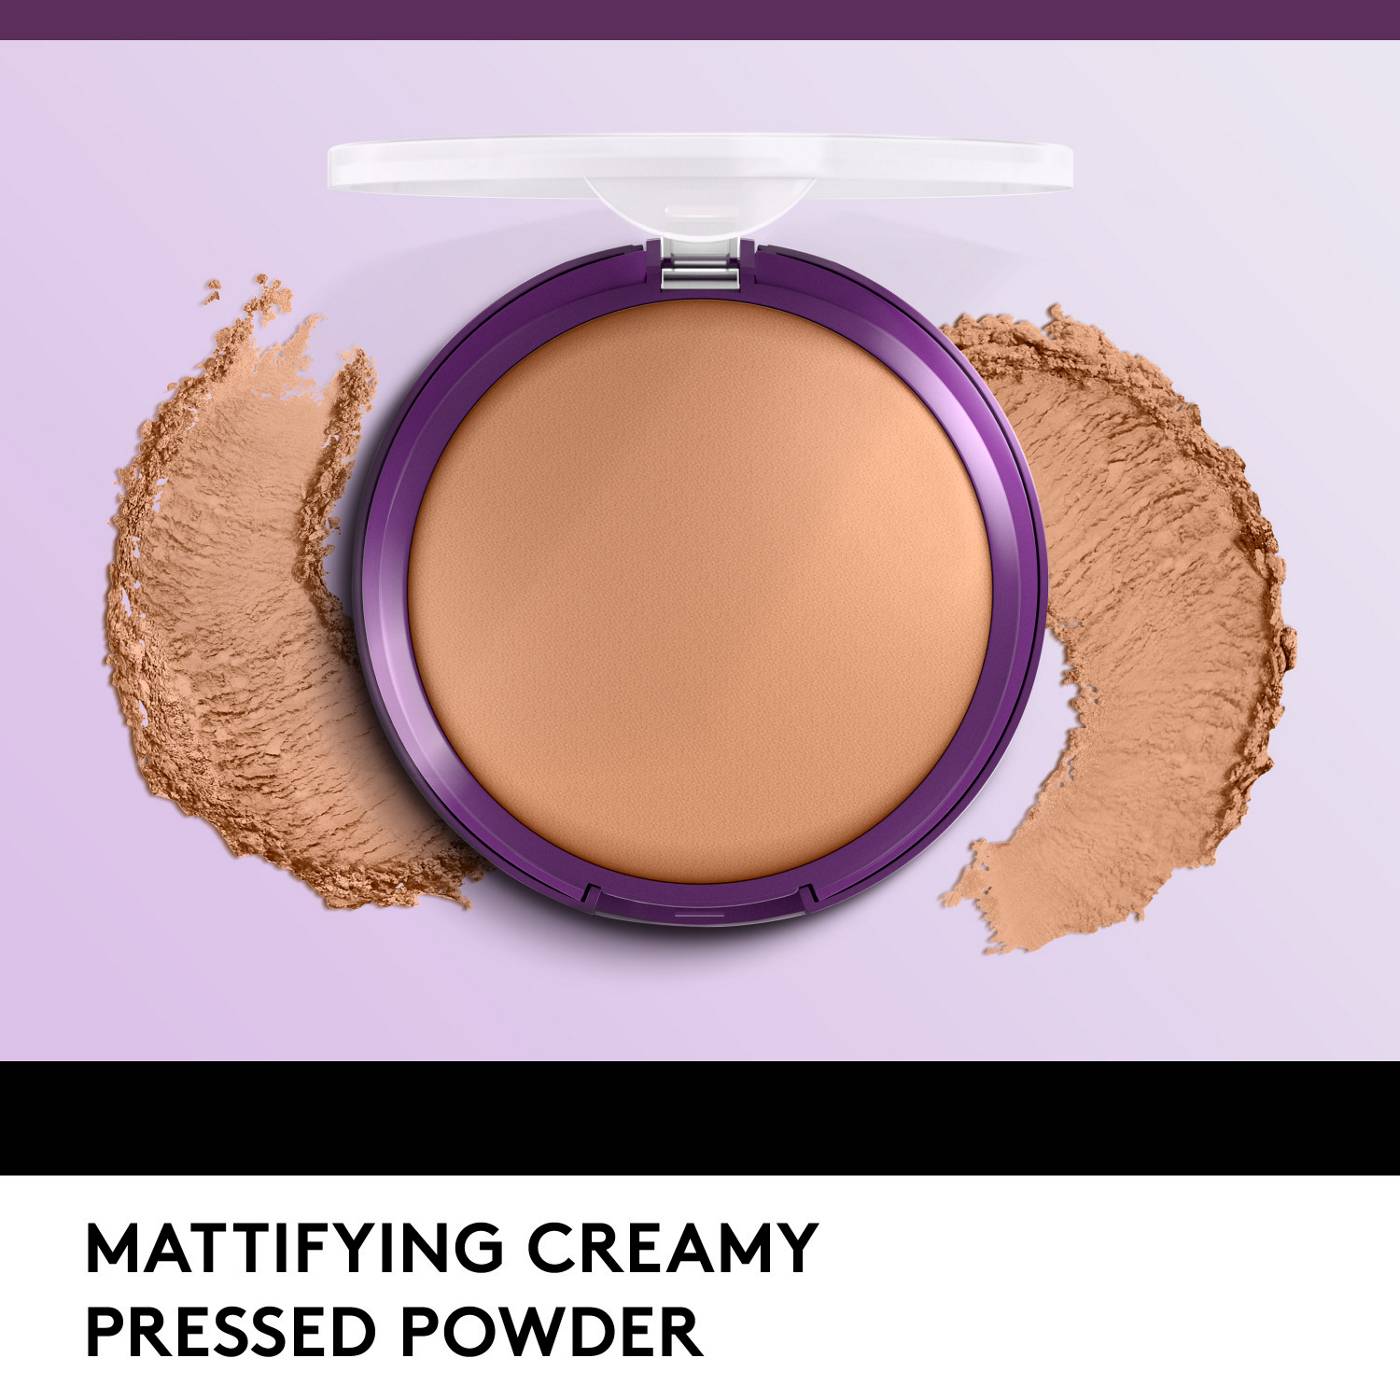 Covergirl Simply Ageless Pressed Powder 100 Translucent; image 5 of 10